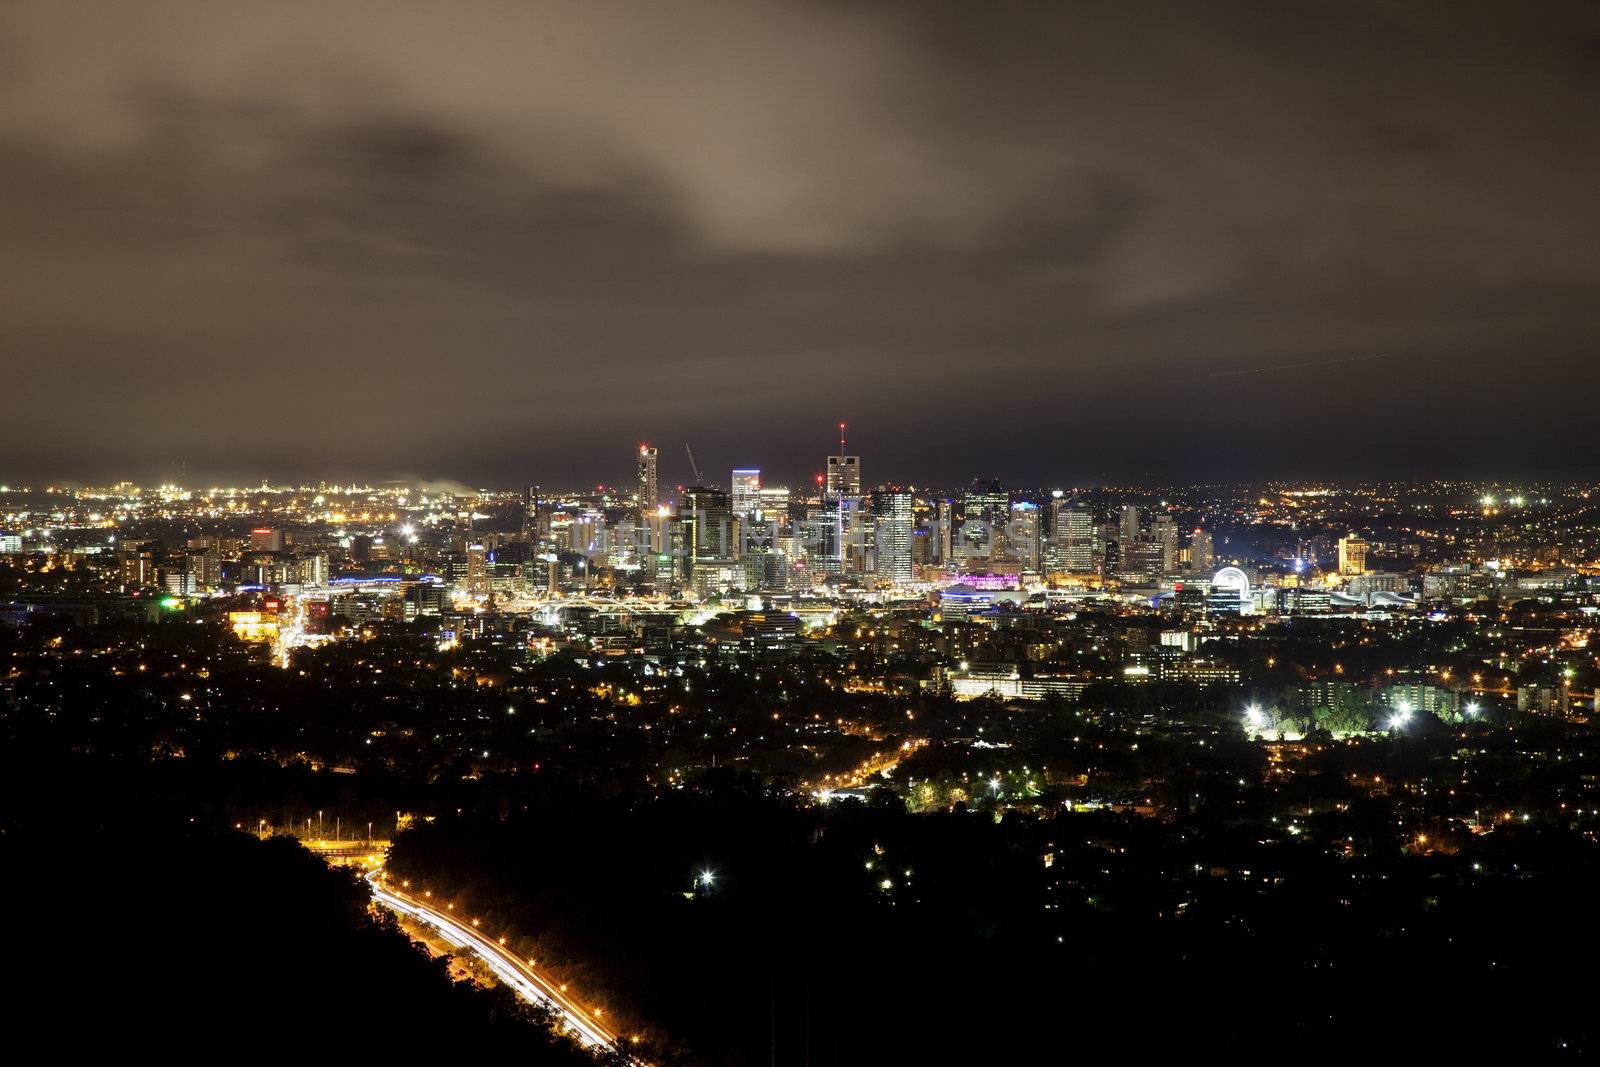 Panoramic shot of the city of Brisbane on an overcast night.